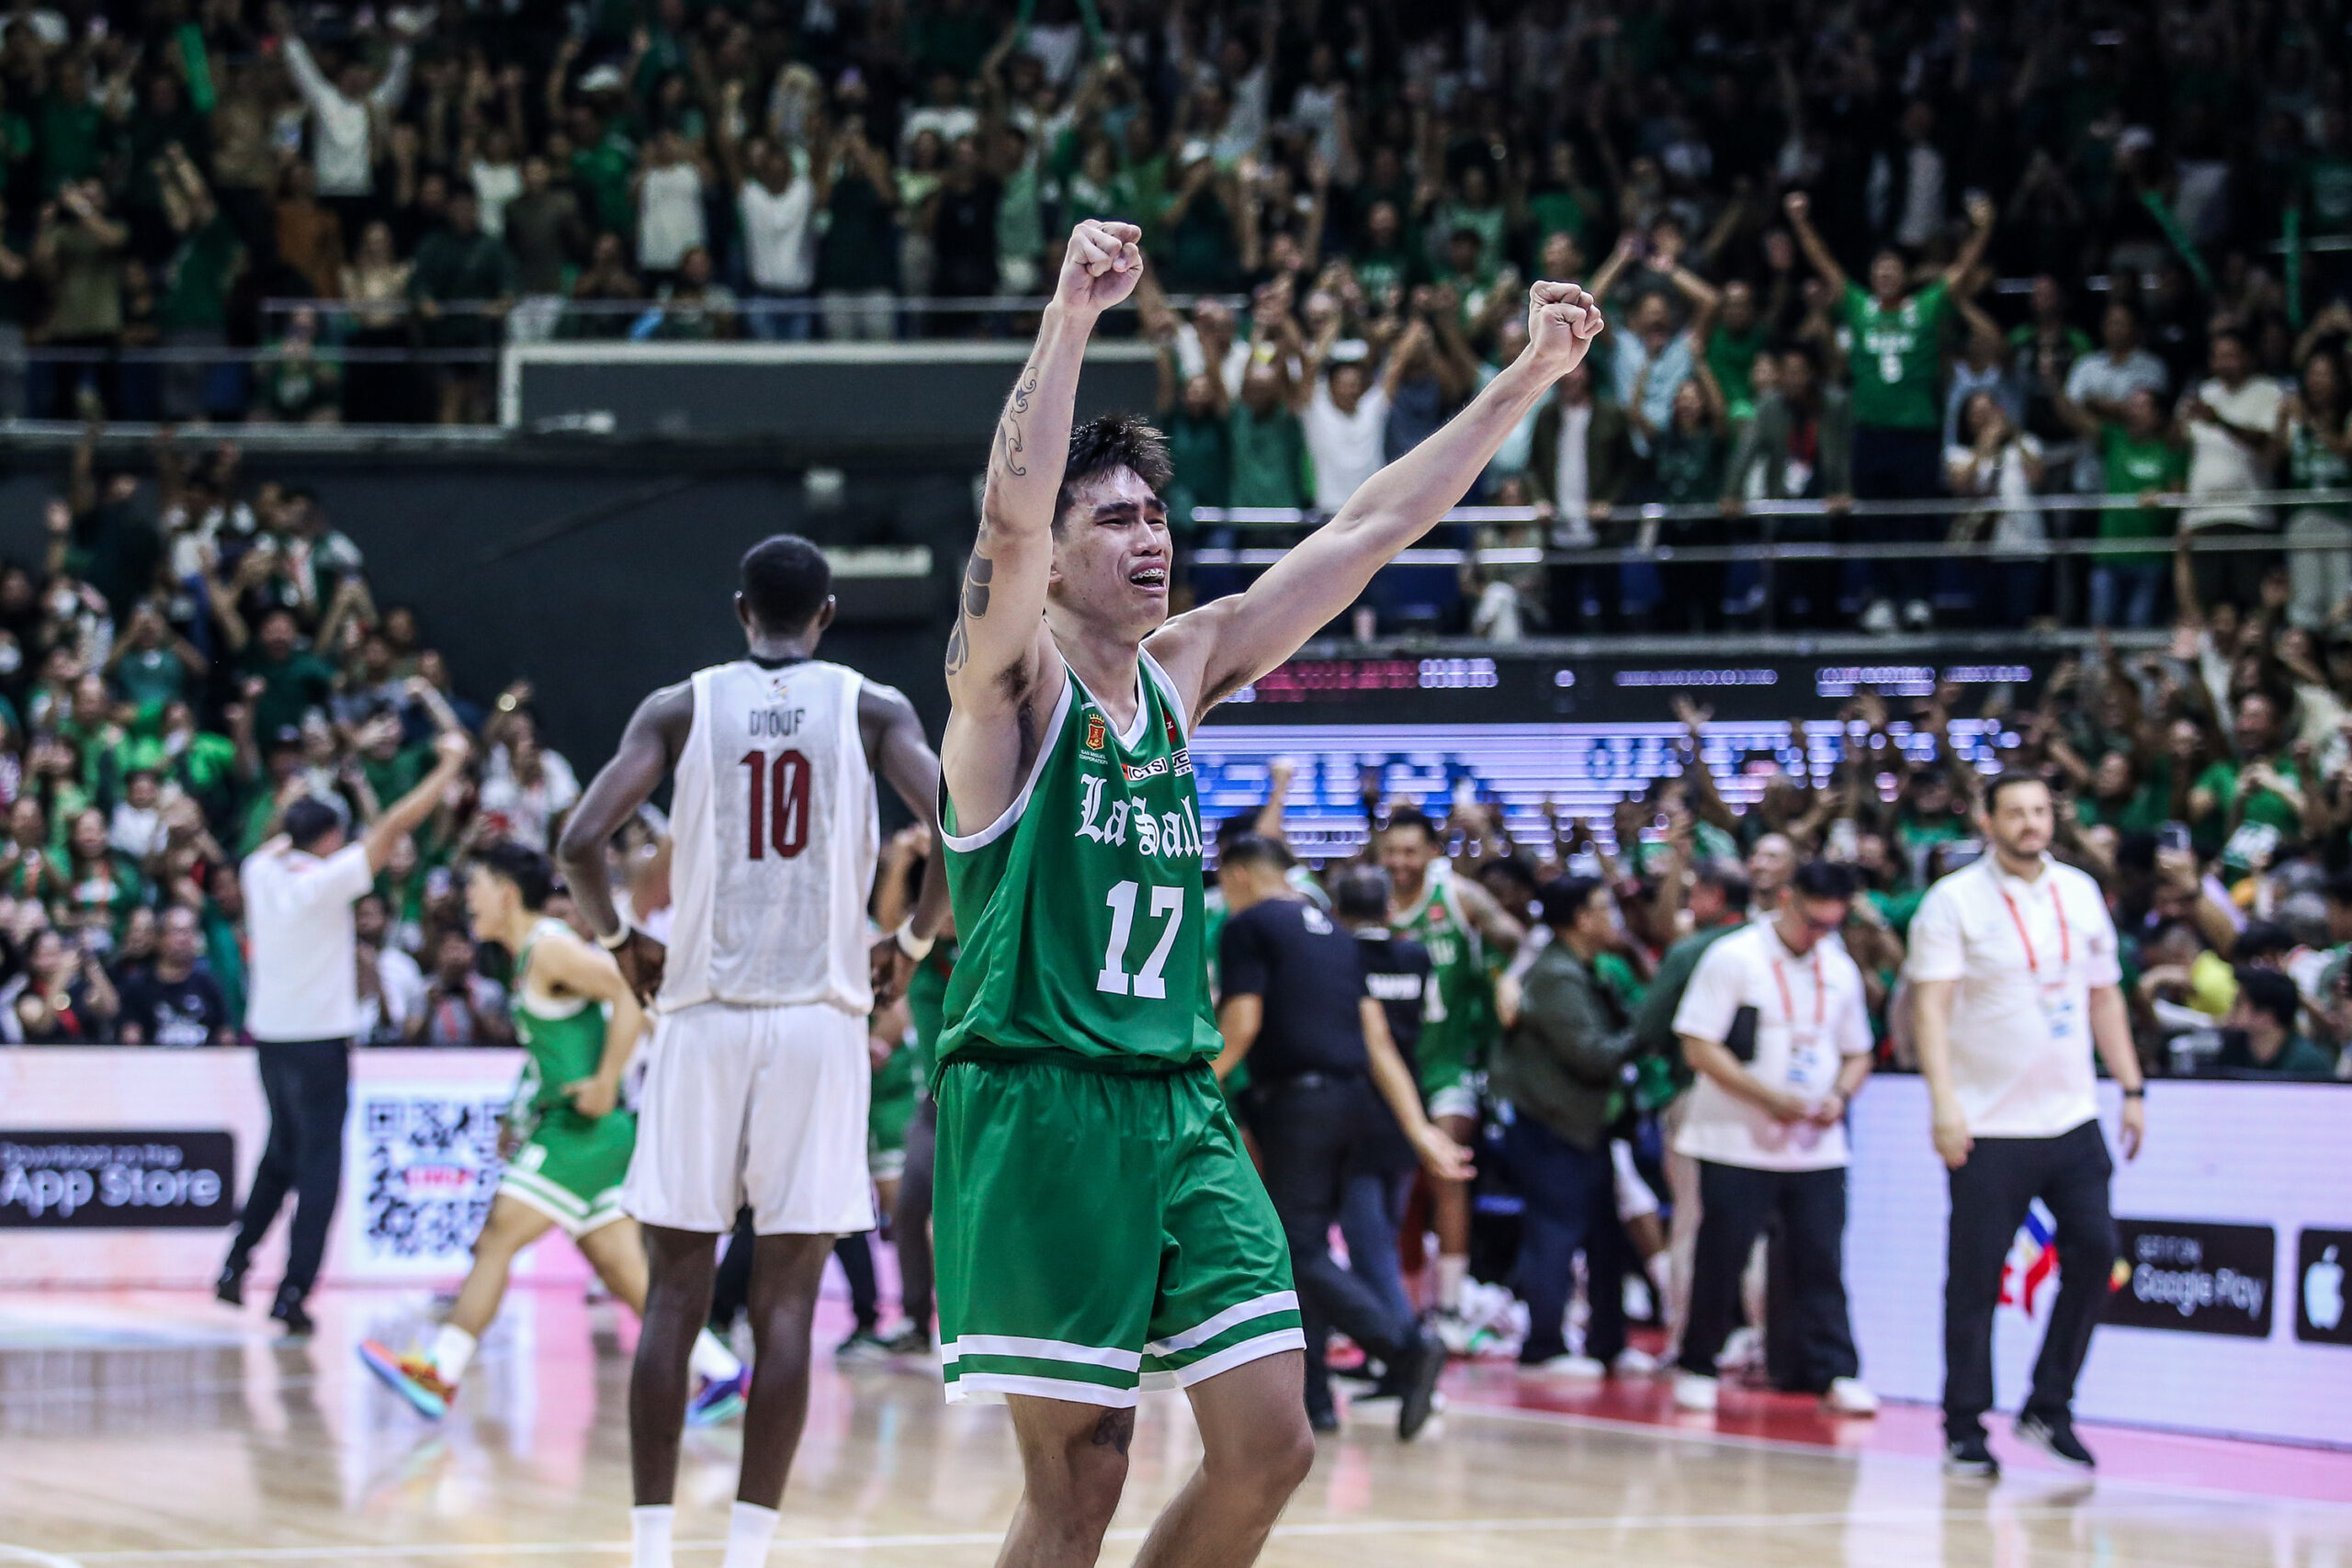 La Salle beats UP in UAAP Finals Game 3, crowned champion